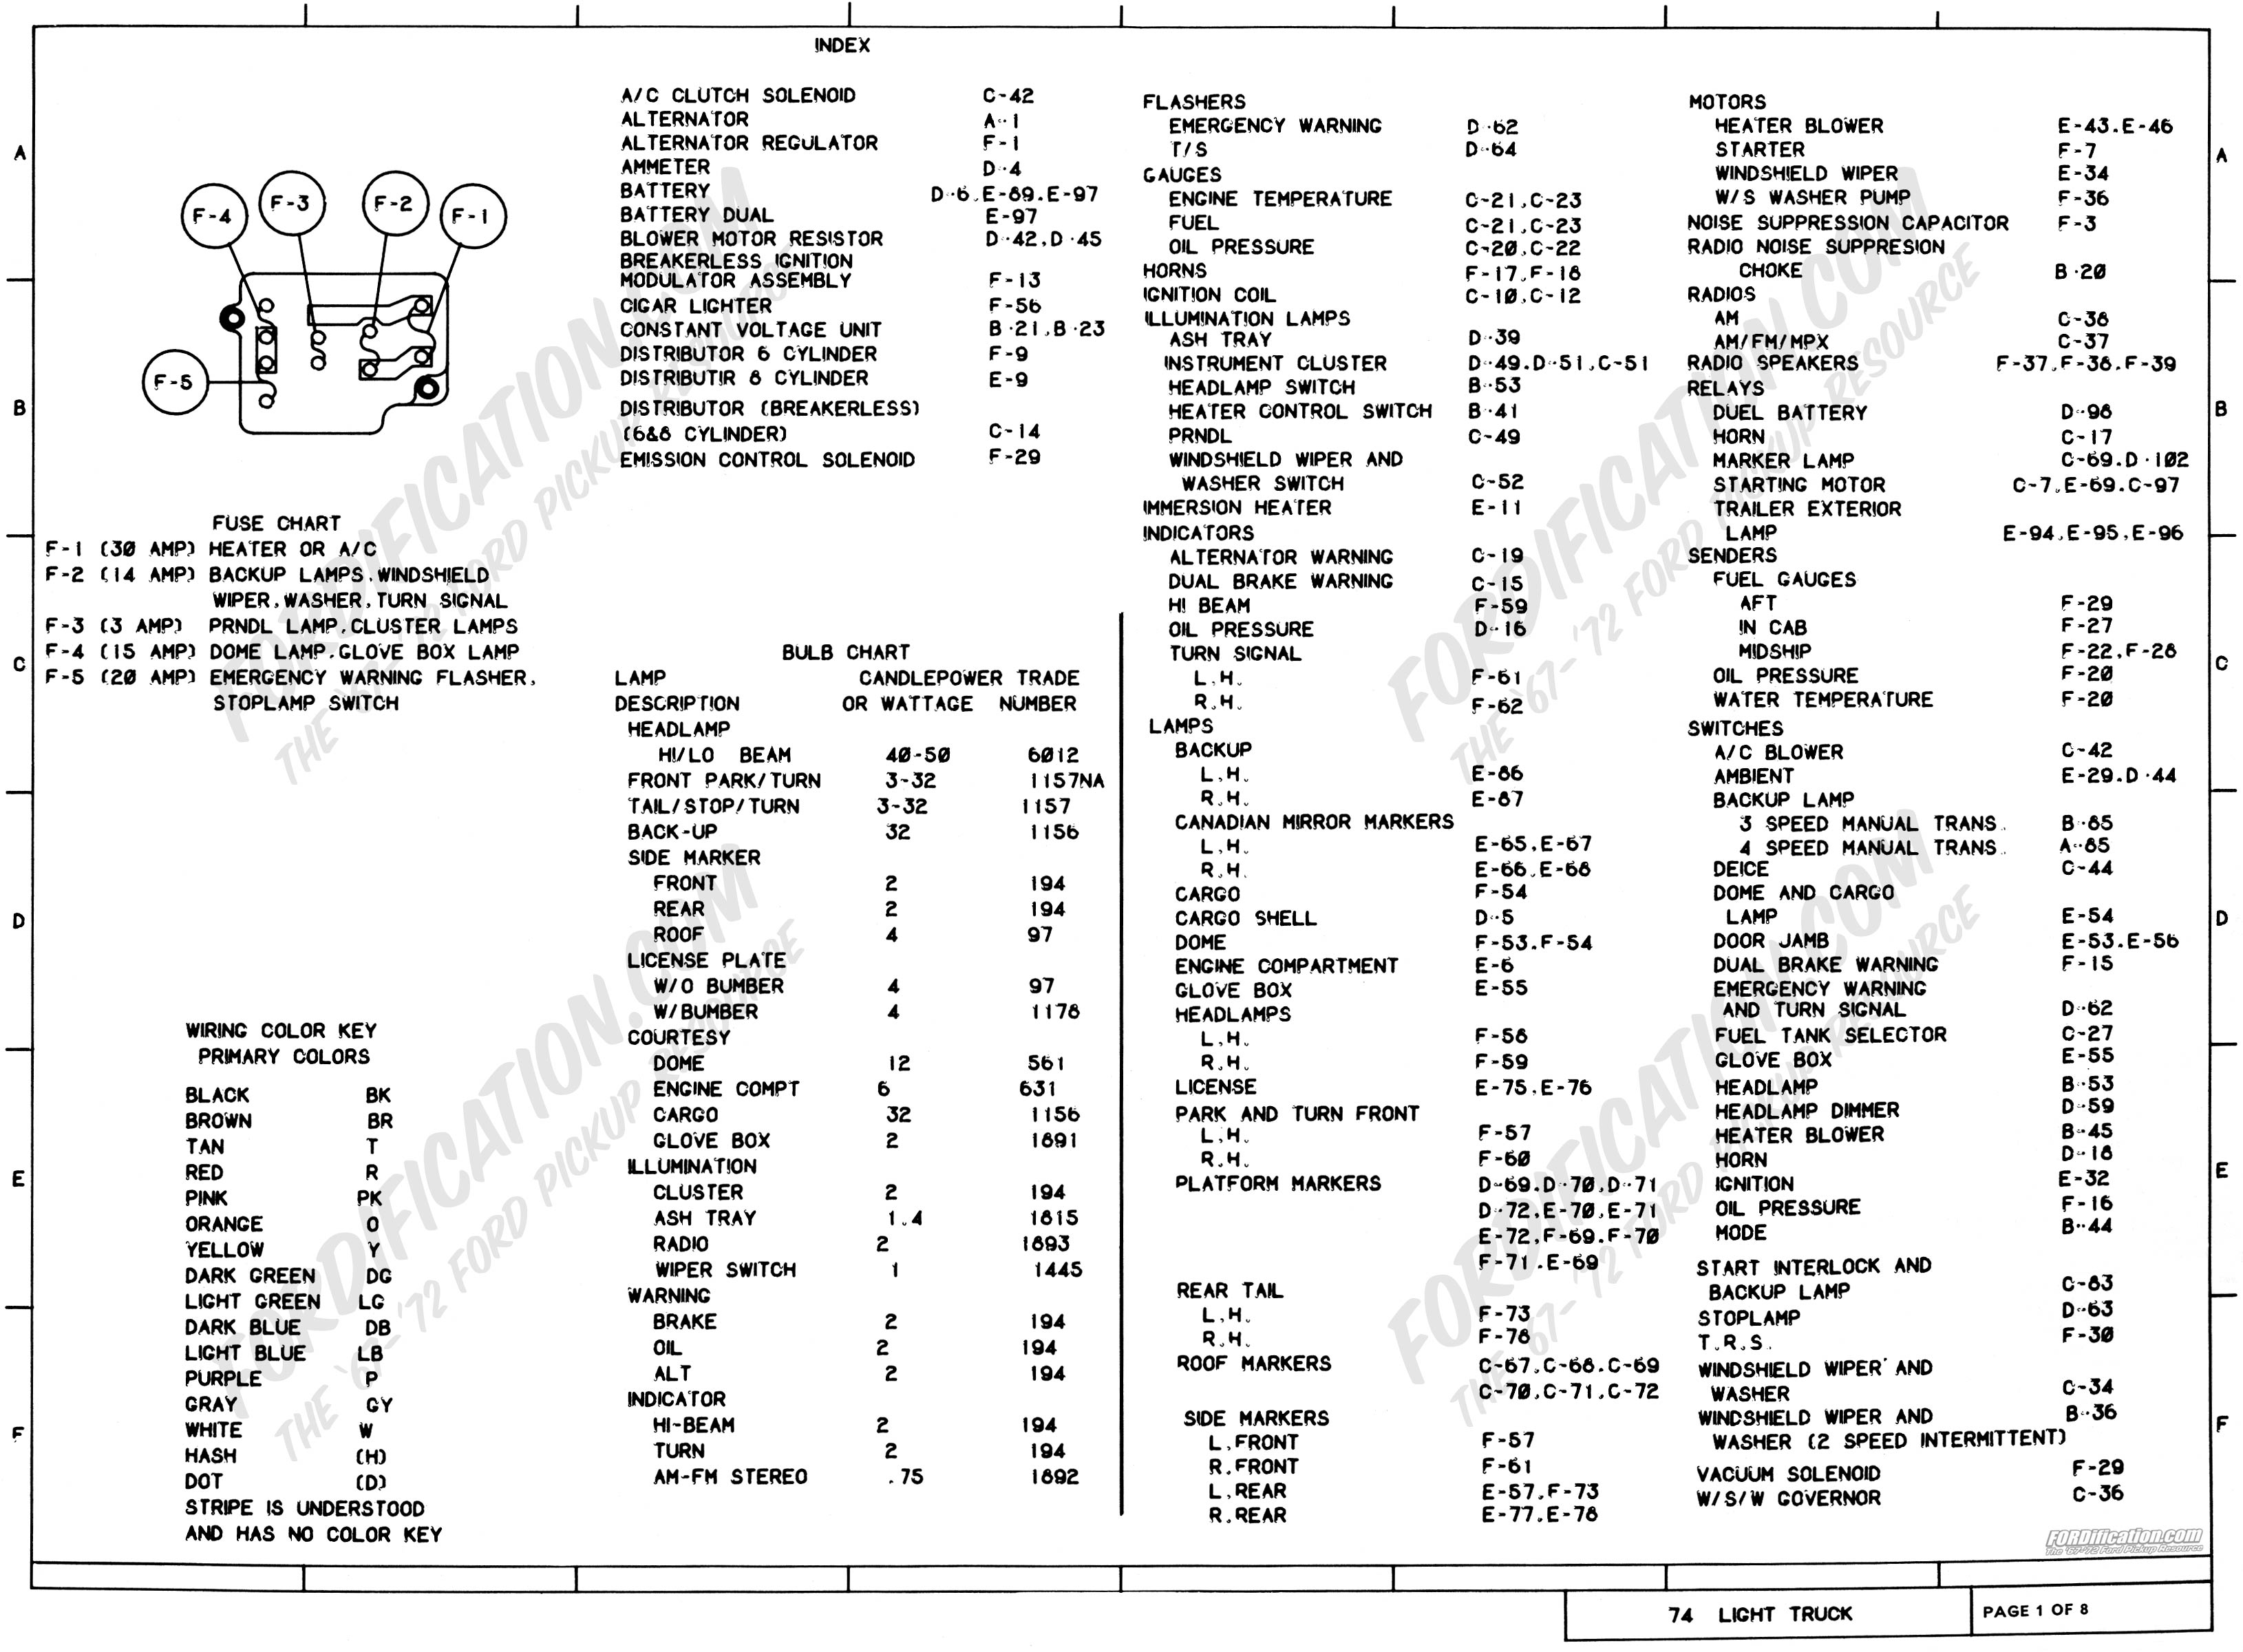 2008 Ford F350 Wiring Diagram from www.fordification.net